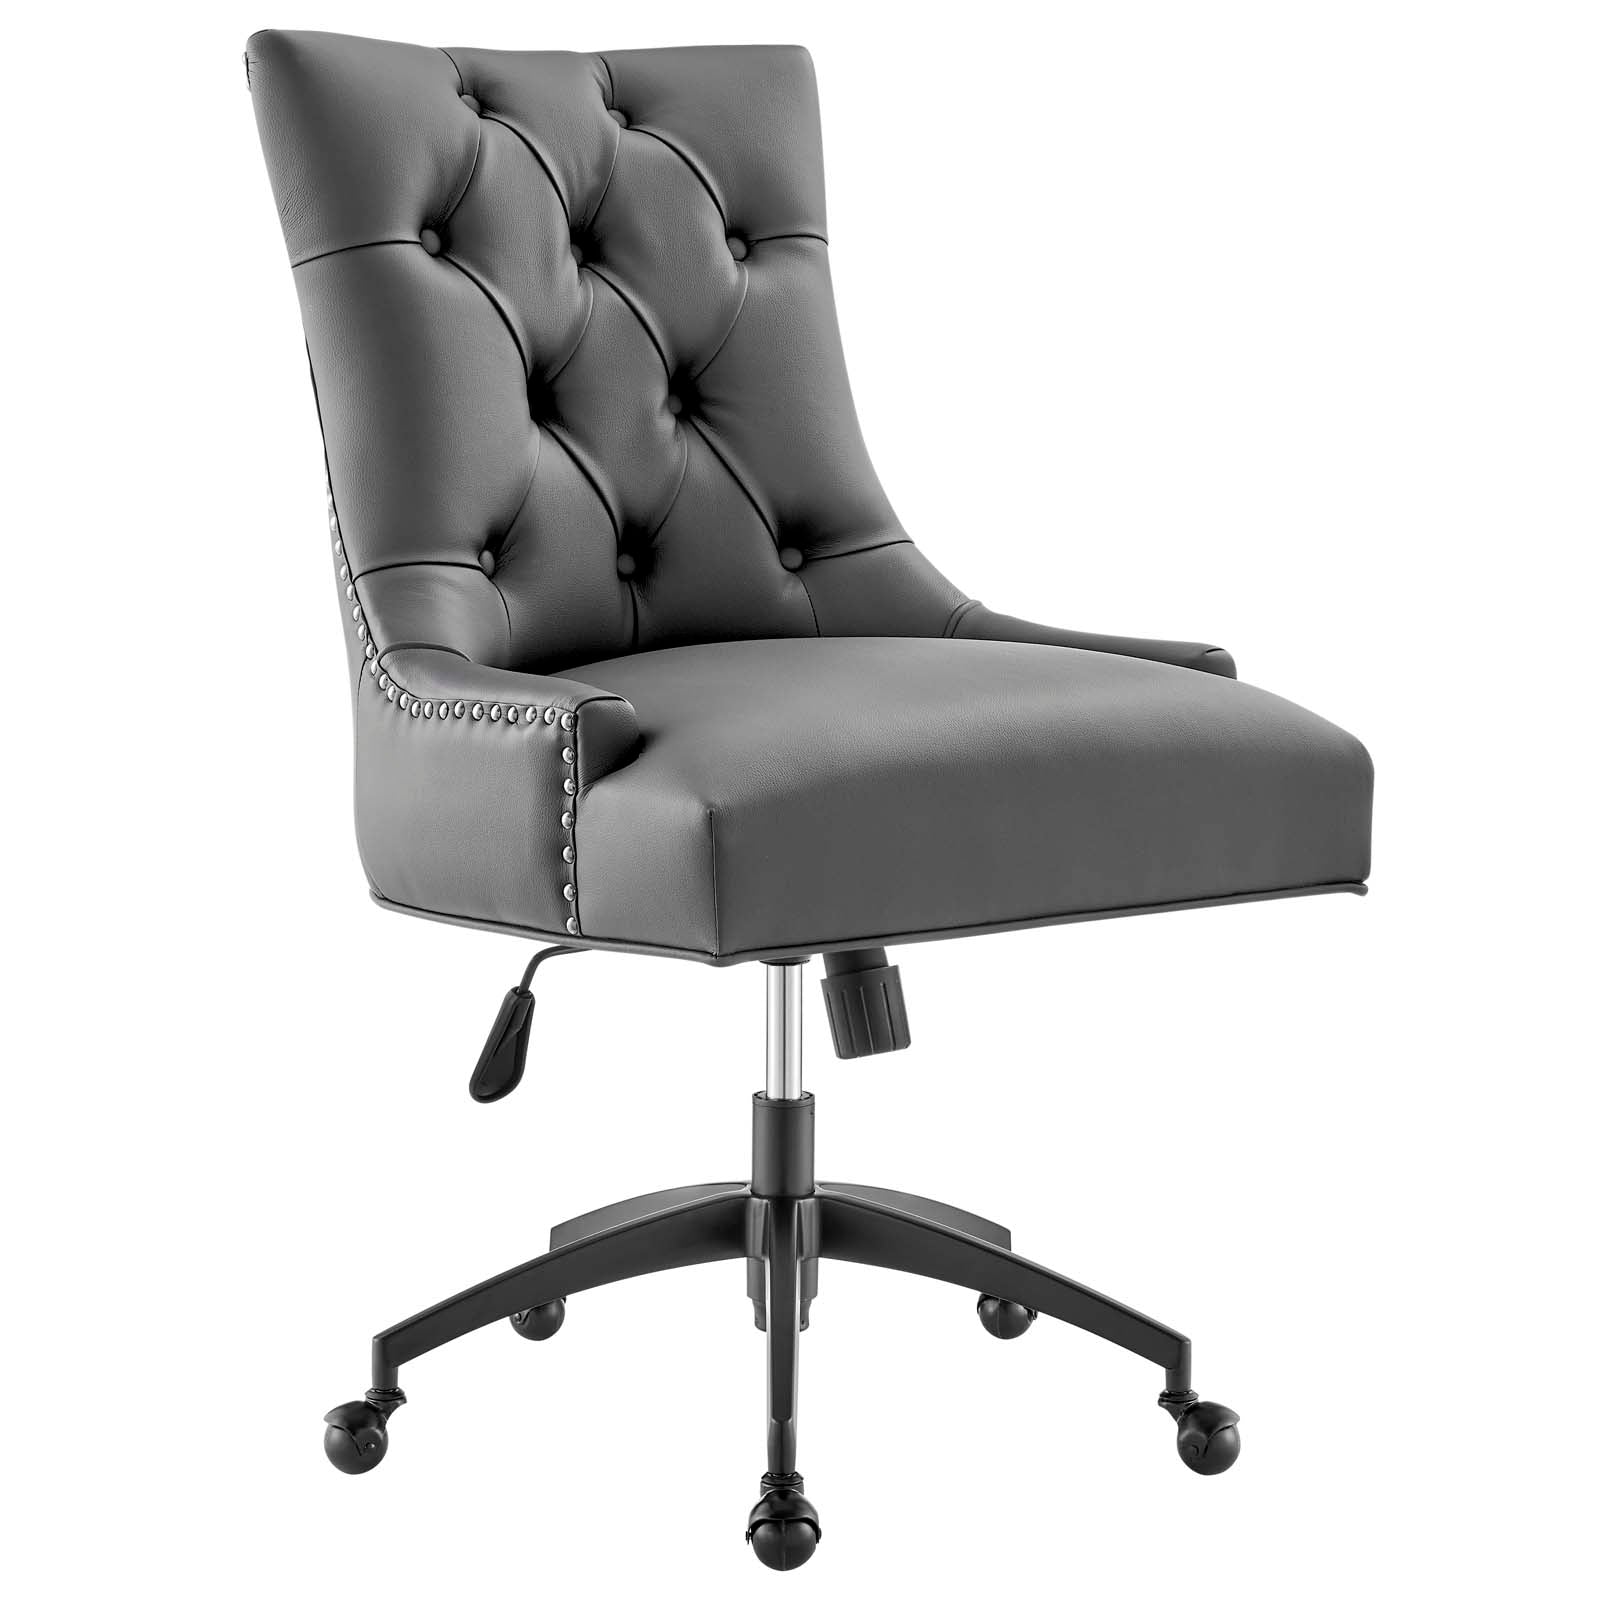 Modway Task Chairs - Regent Tufted Vegan Leather Office Chair Black Gray